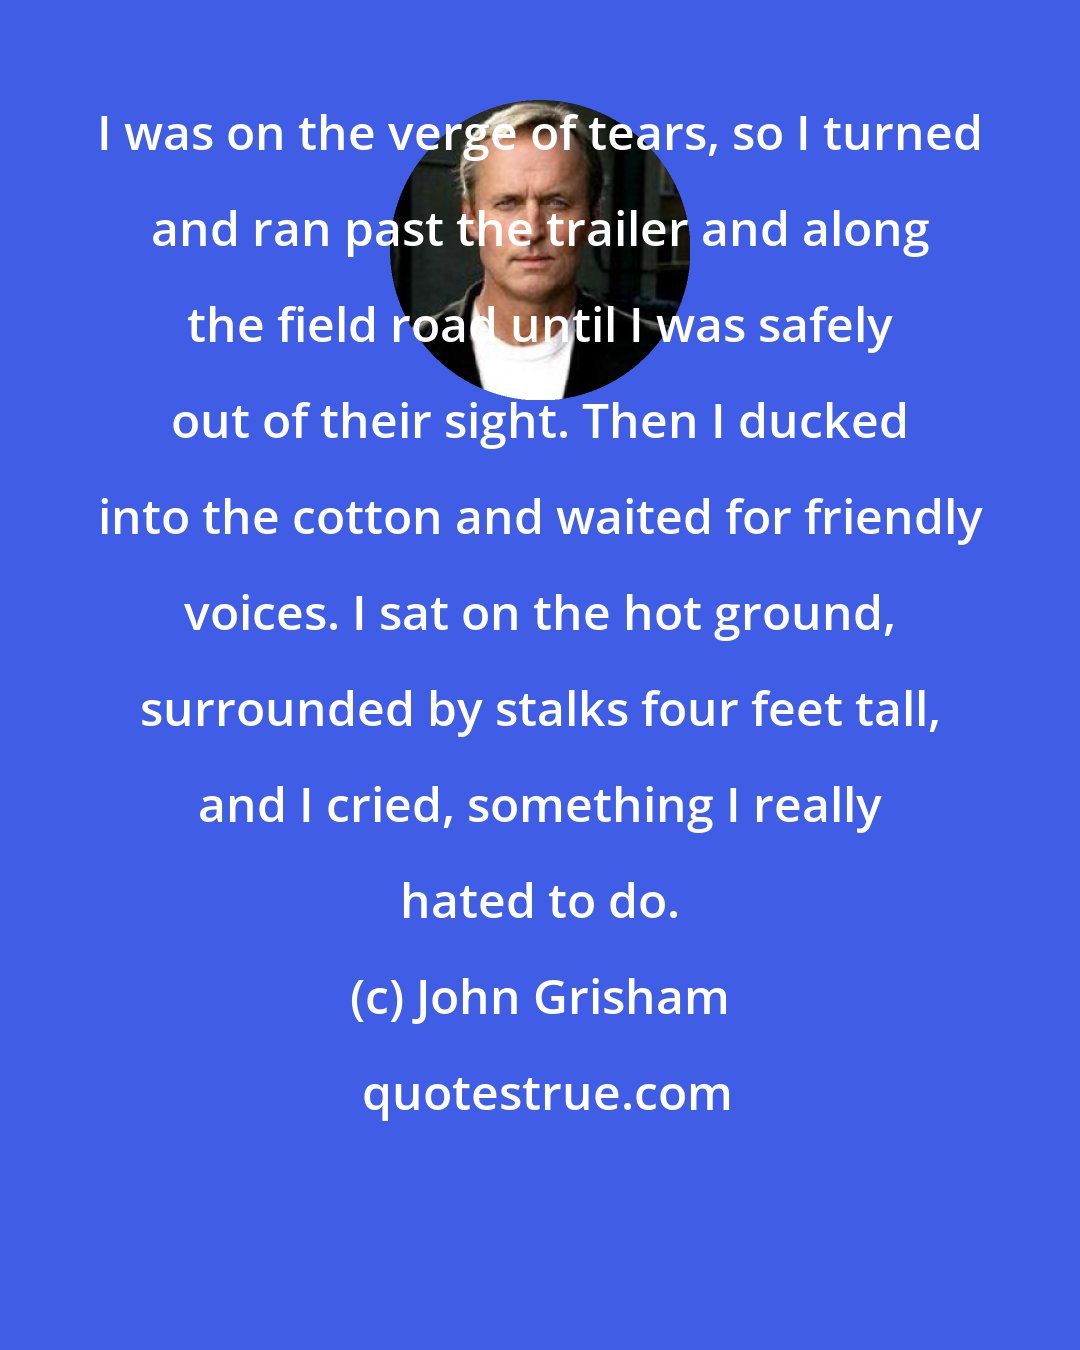 John Grisham: I was on the verge of tears, so I turned and ran past the trailer and along the field road until I was safely out of their sight. Then I ducked into the cotton and waited for friendly voices. I sat on the hot ground, surrounded by stalks four feet tall, and I cried, something I really hated to do.